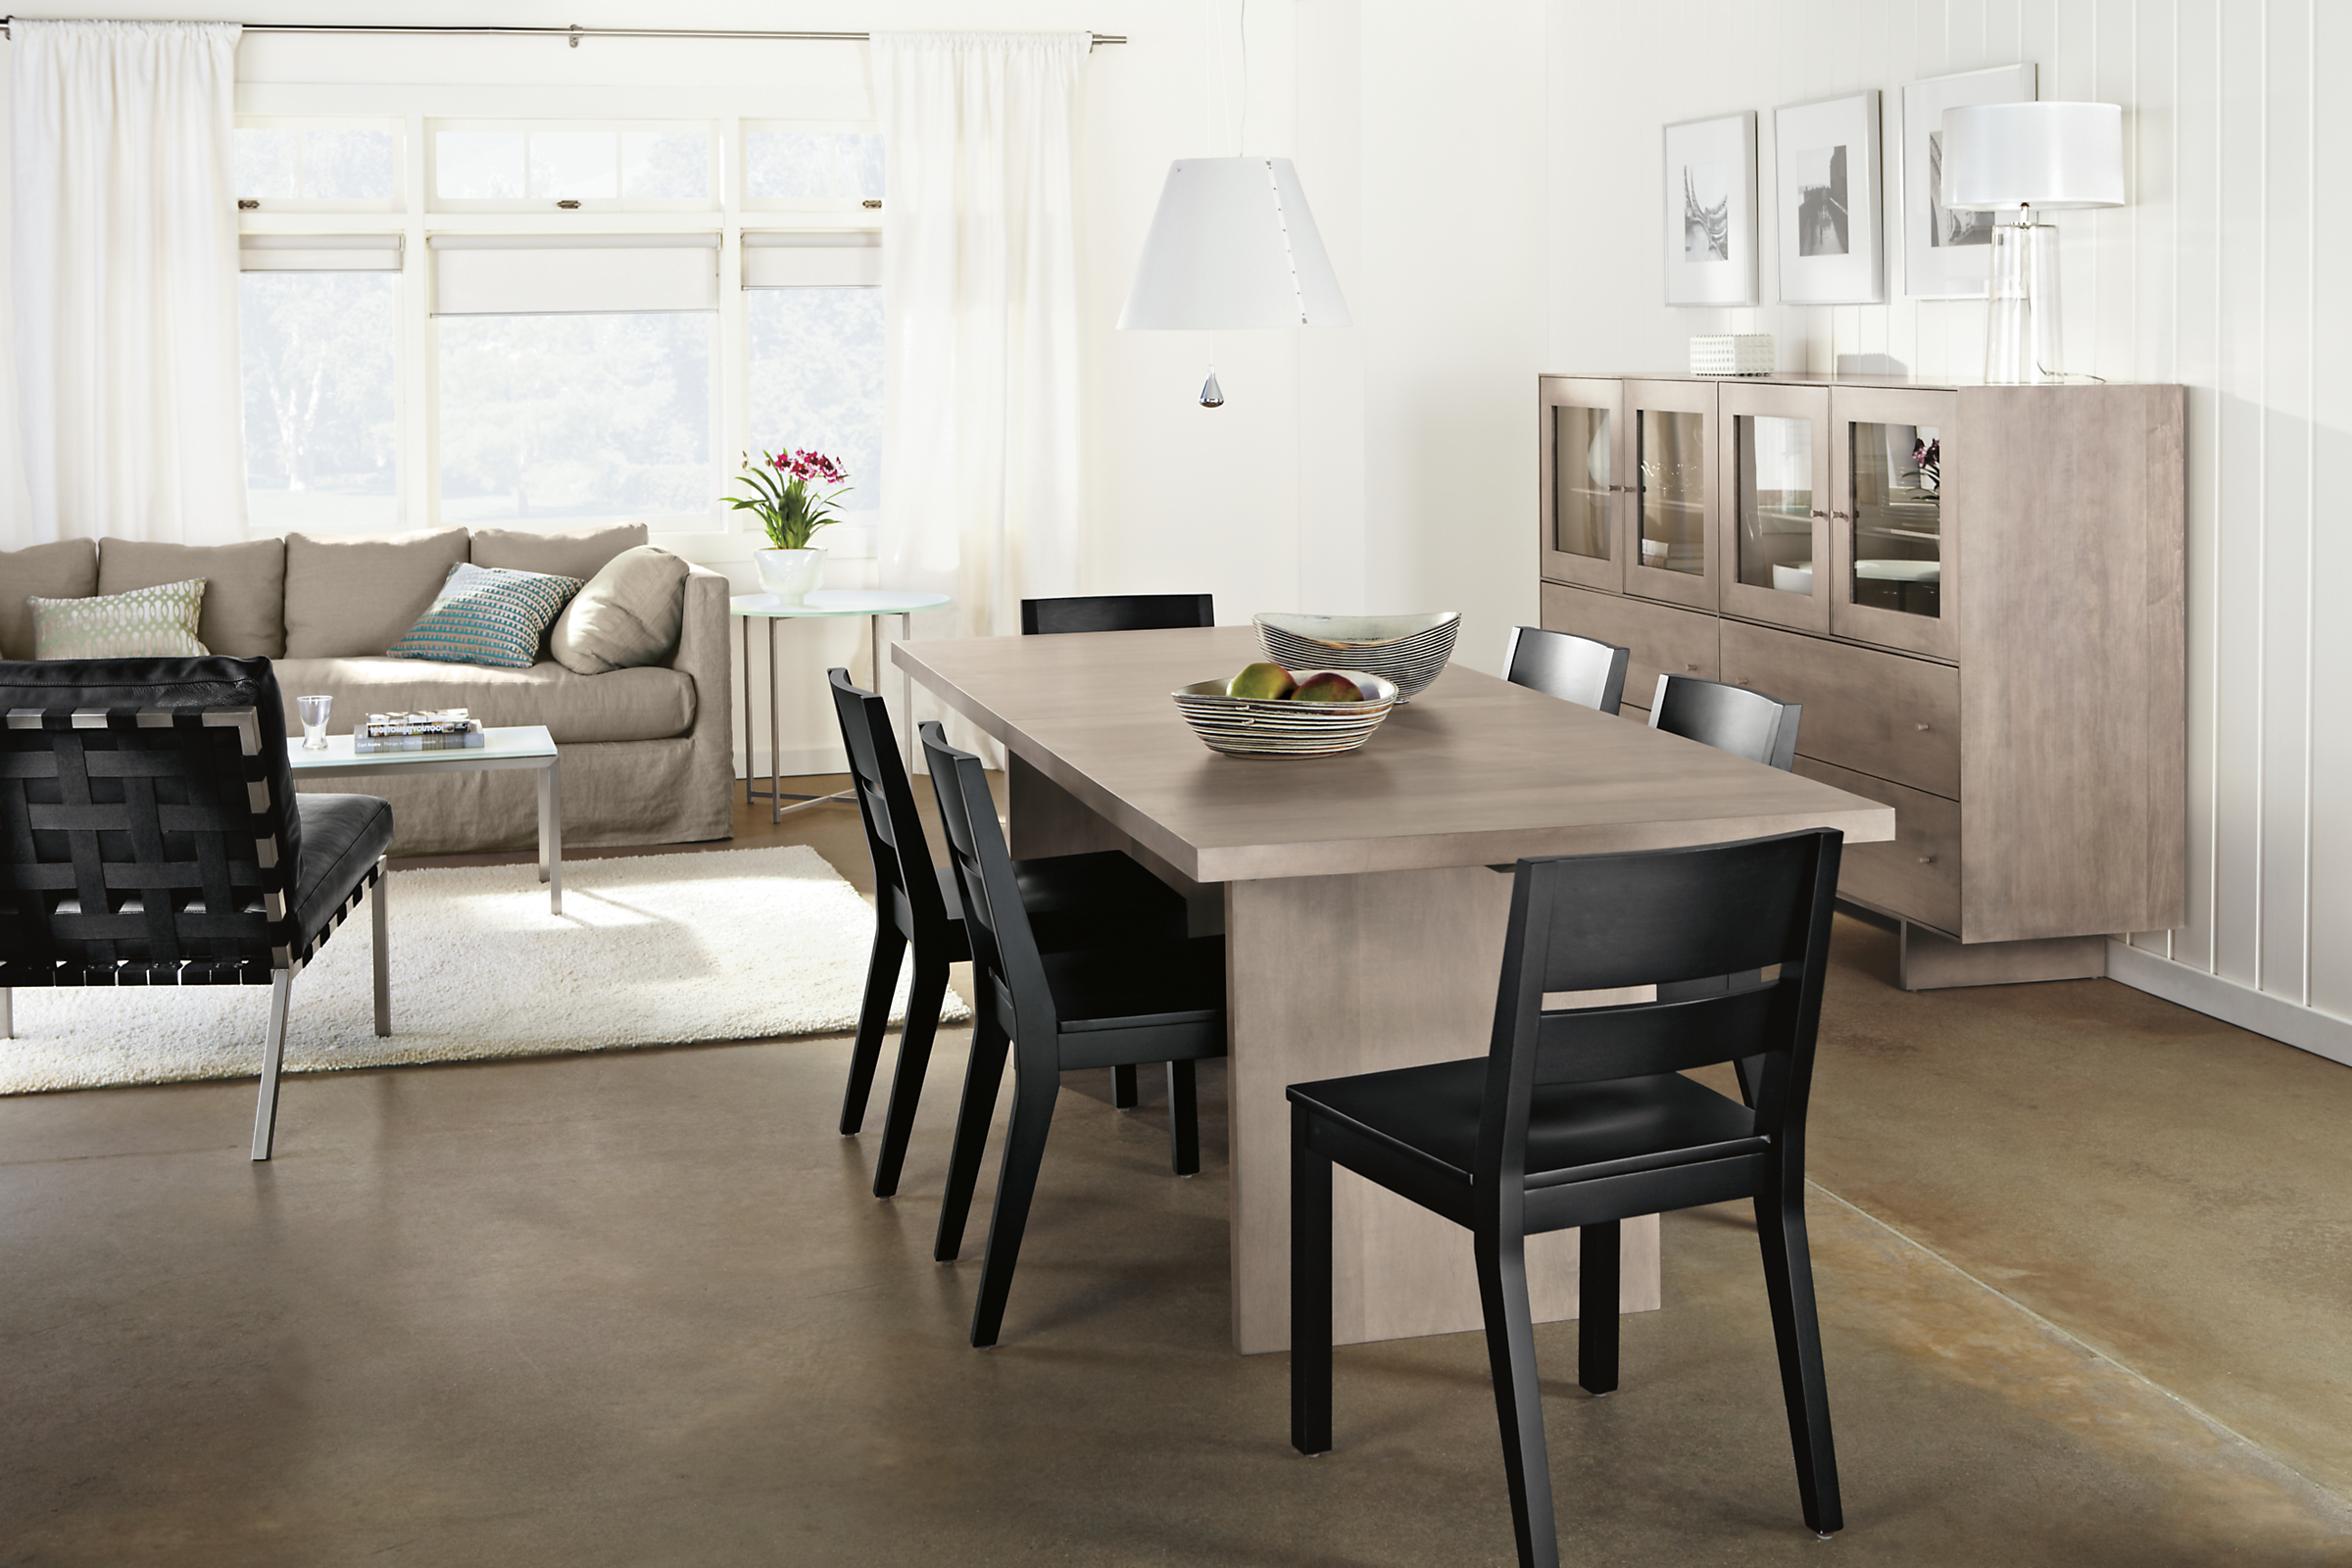 Corbett extension table in open concept layout.